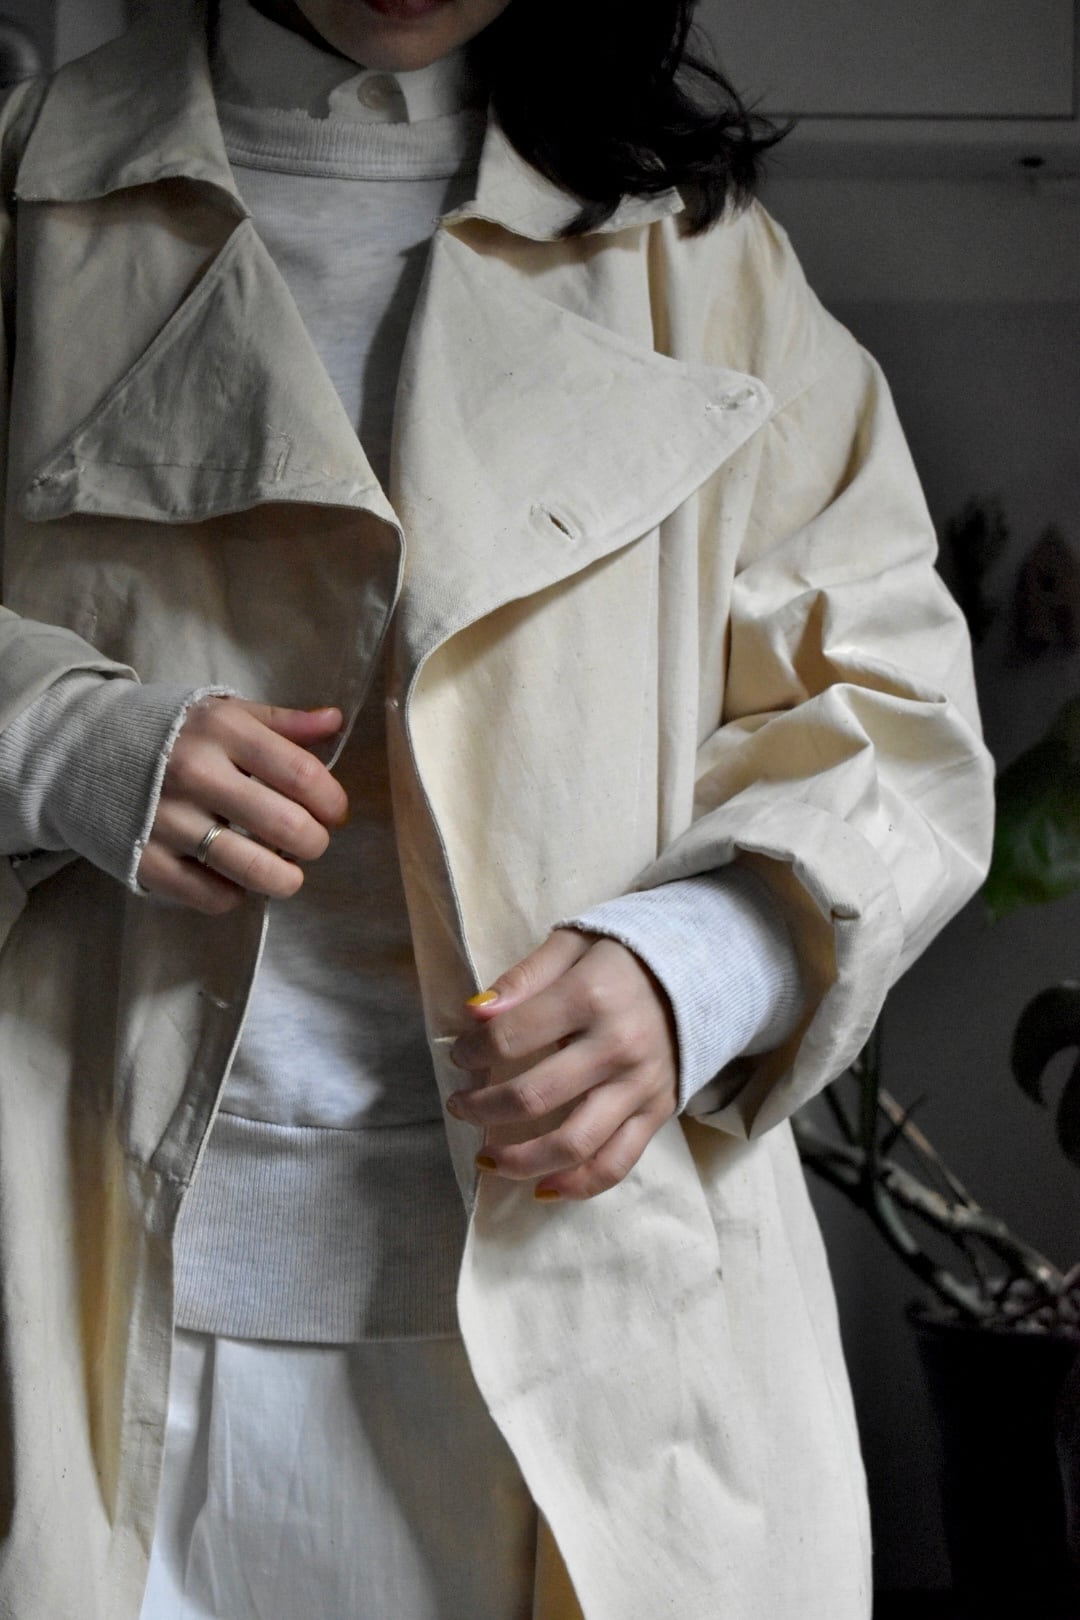 's  "vintage" "french military" "hospital coat" "french linen